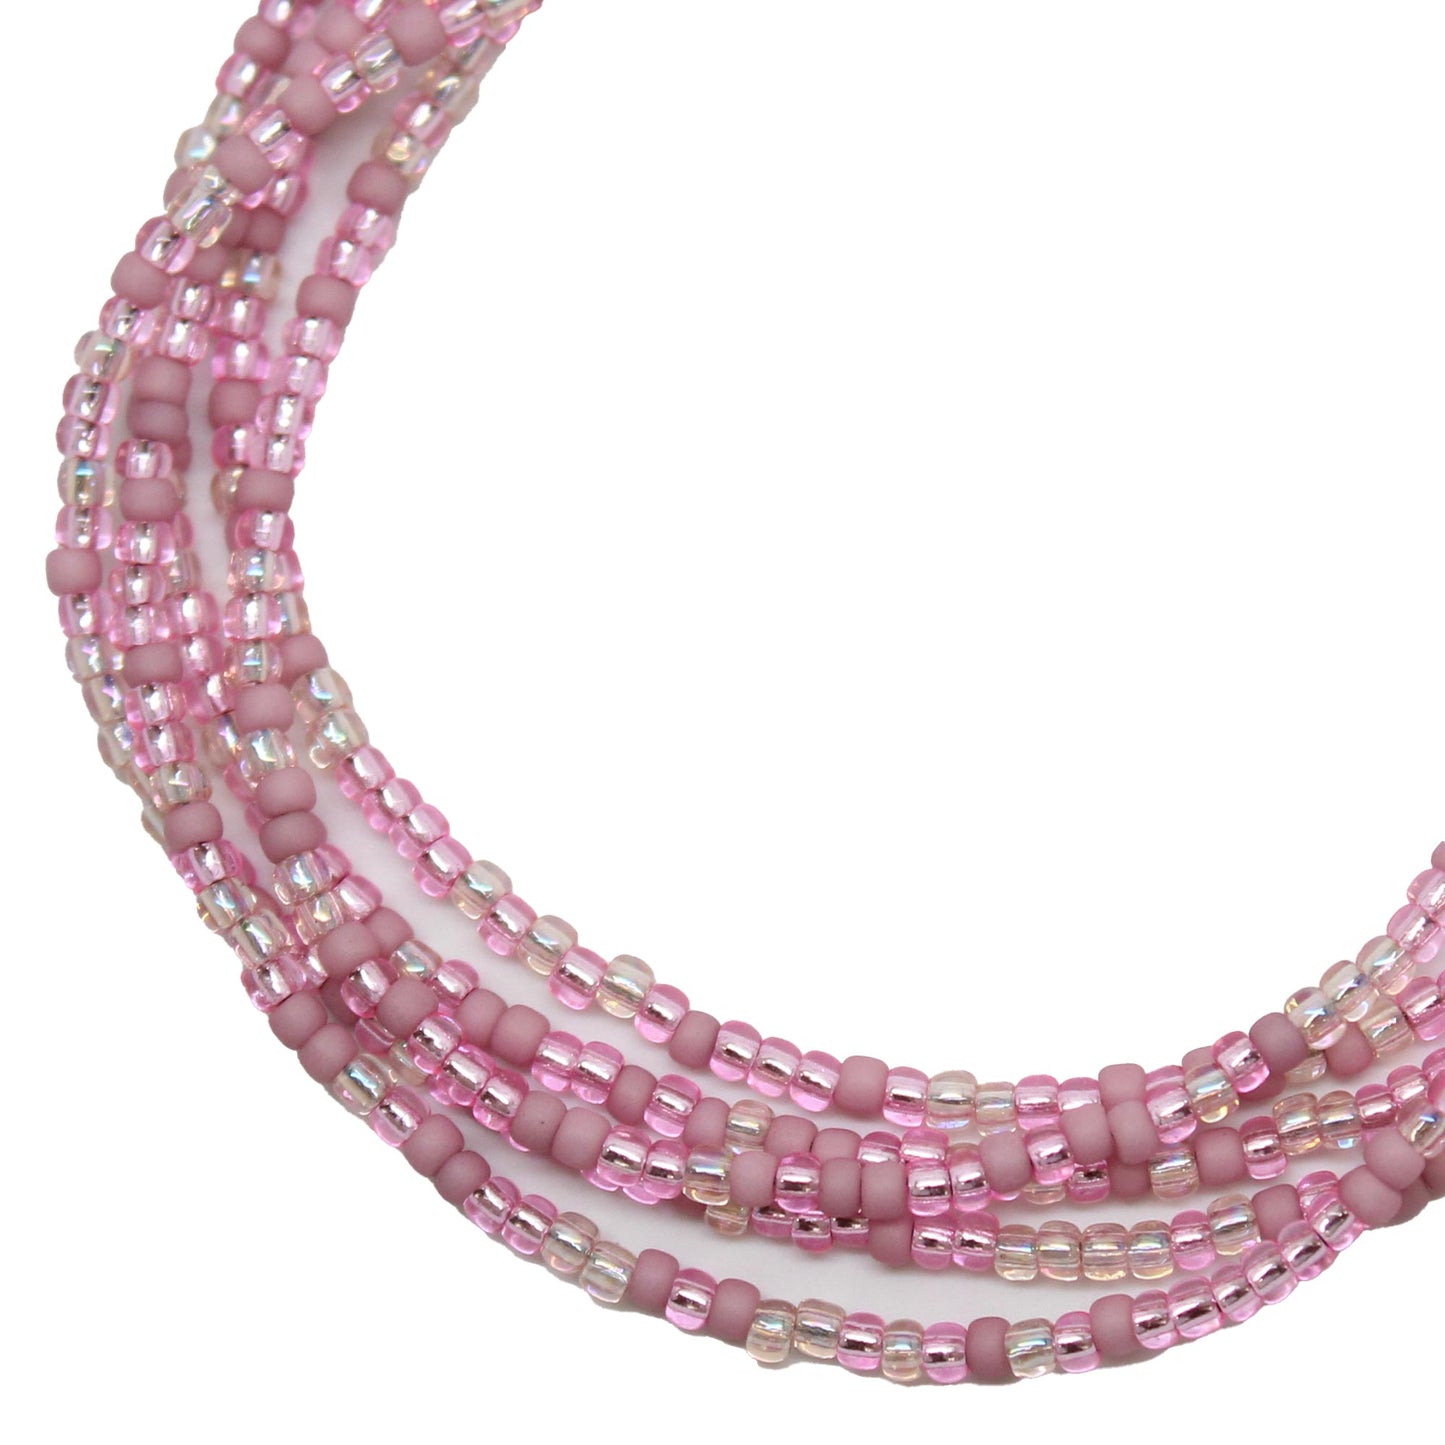 THE TWO] Necklace: Pink/White [Large Beads] | BAM-BAM